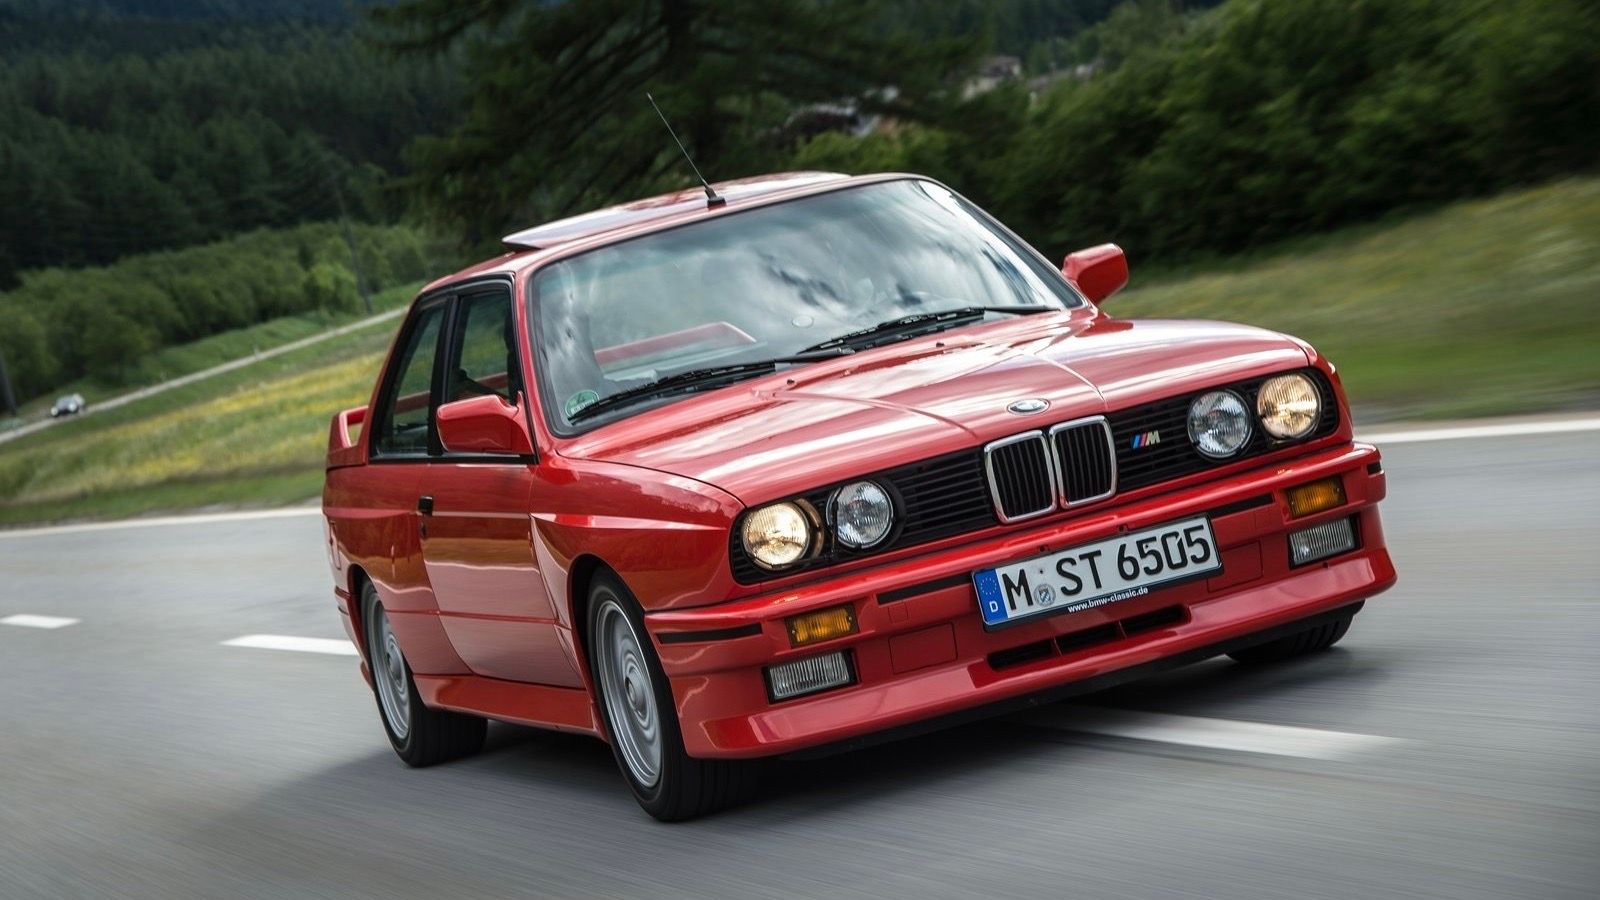 10 Reasons The BMW E30 Was Such An Awesome Car